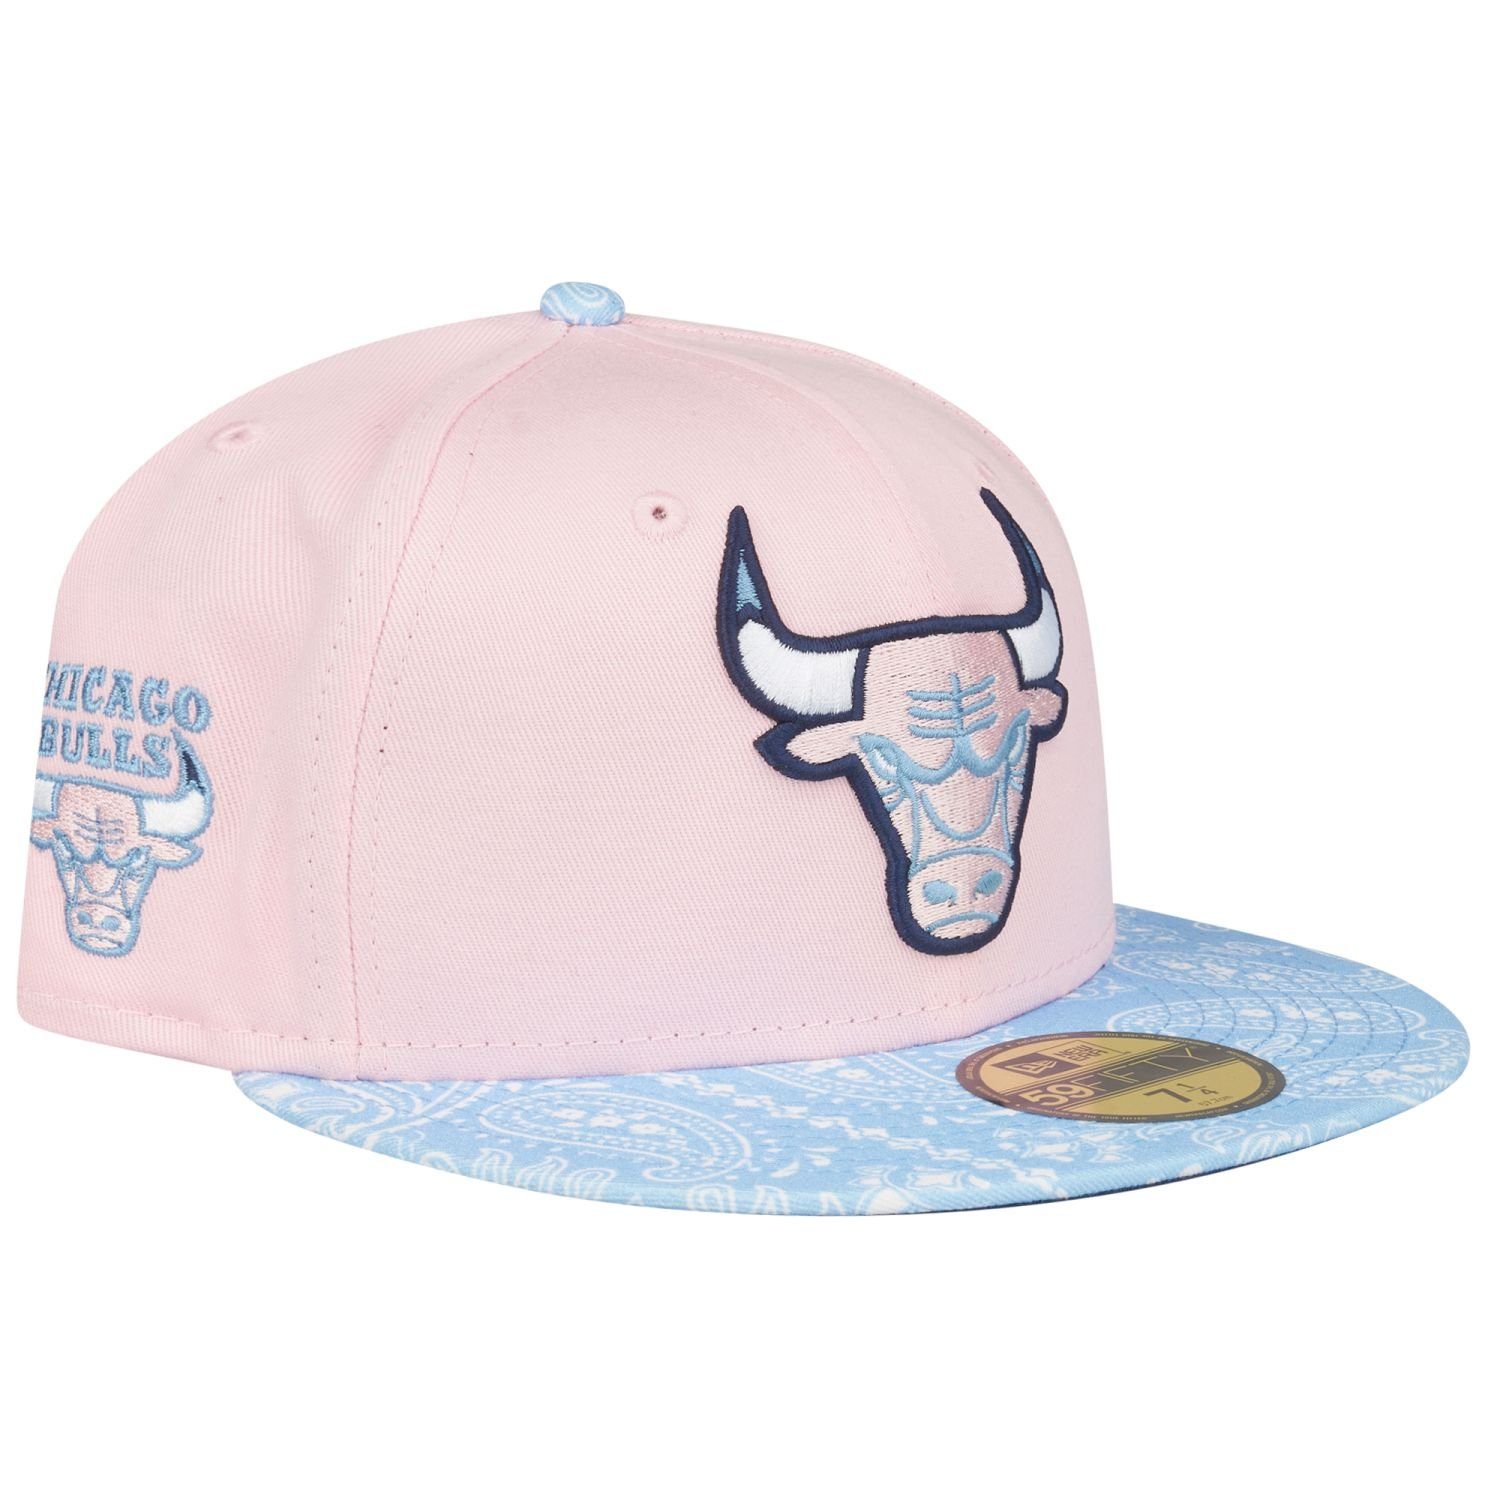 New Era Fitted Cap 59Fifty PAISLEY Chicago Bulls